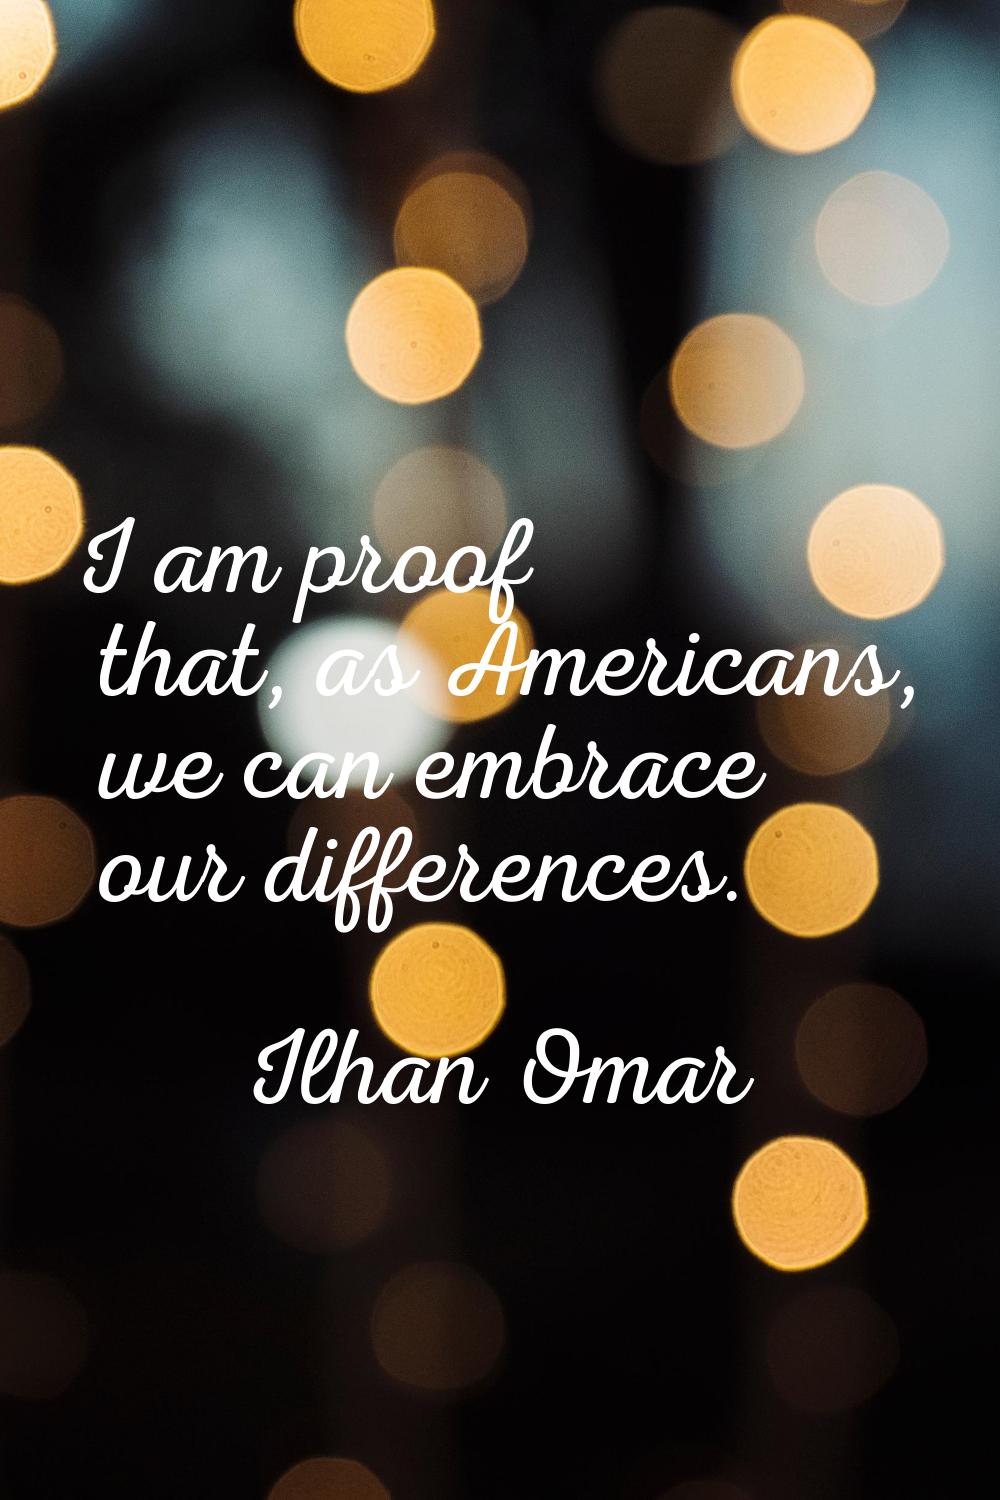 I am proof that, as Americans, we can embrace our differences.